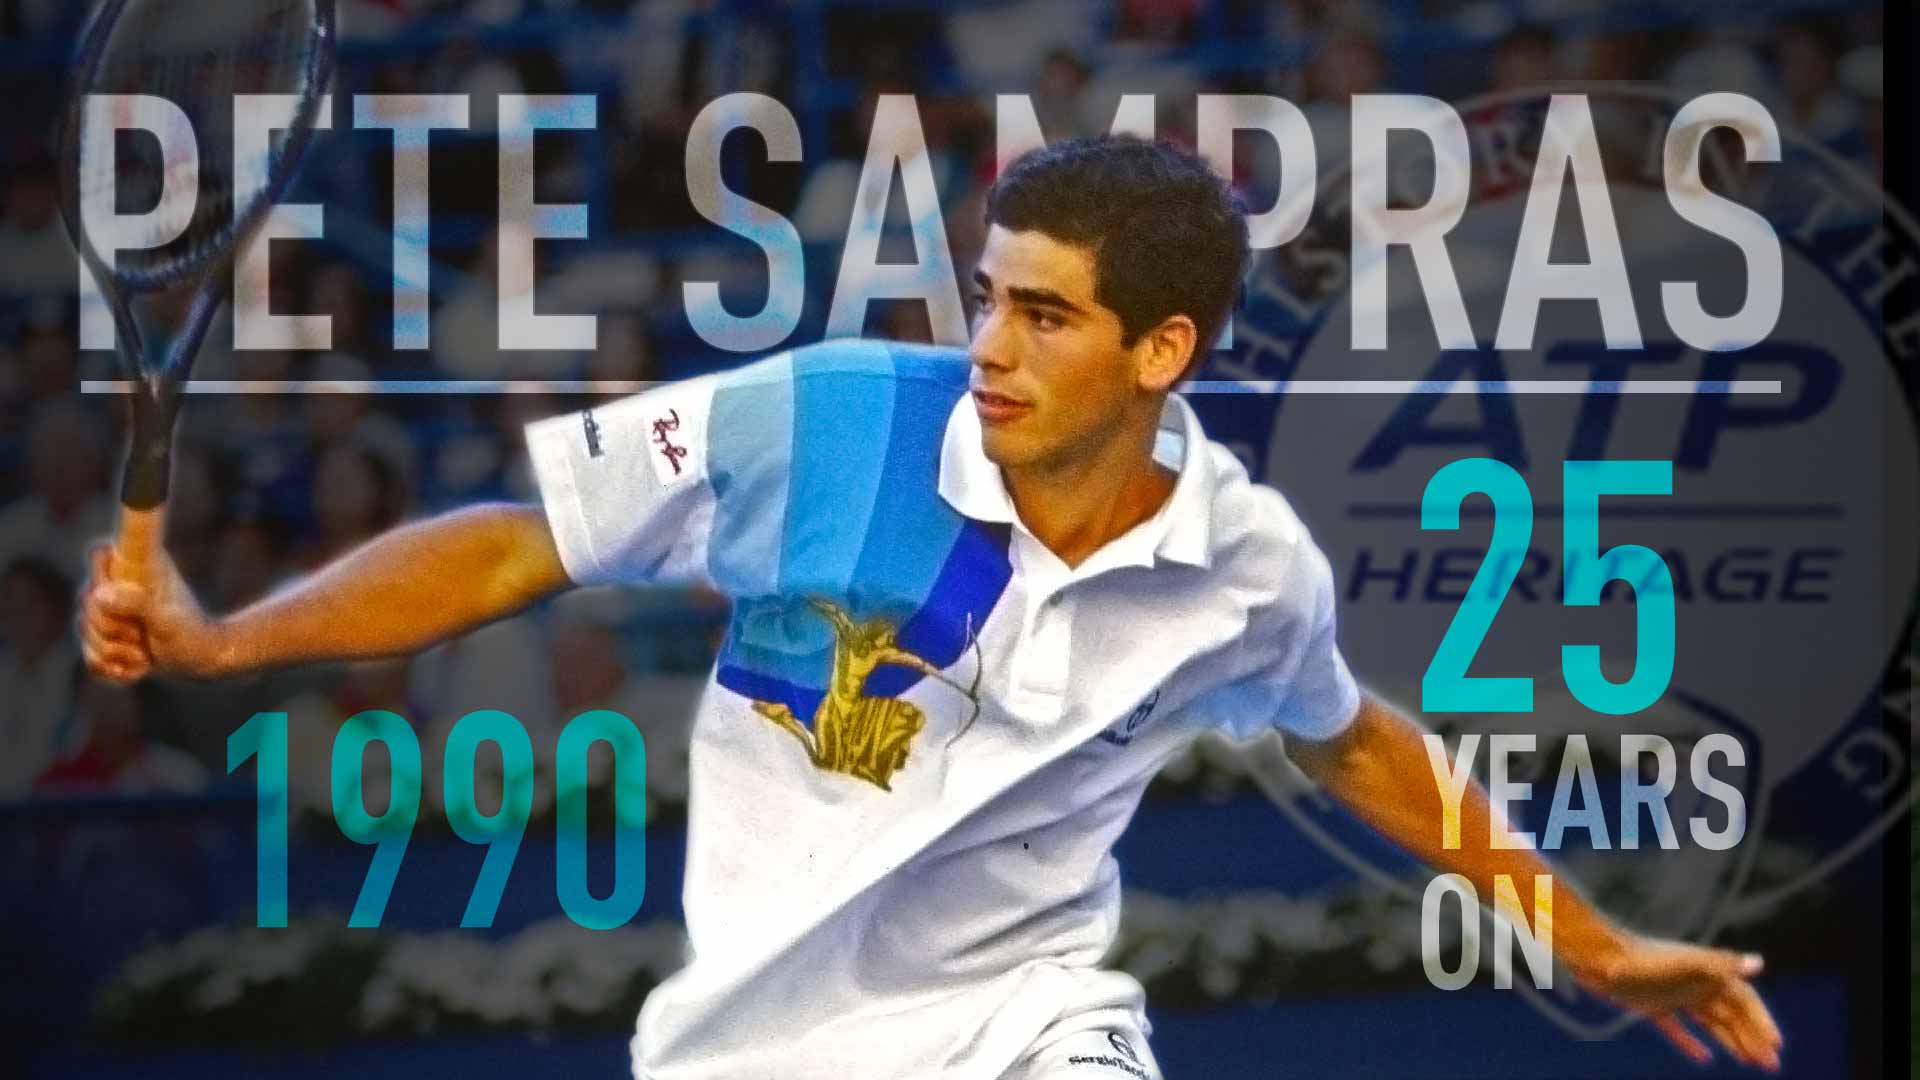 The life of Pete Sampras changed overnight as a result of becoming the youngest champion in US Open history.